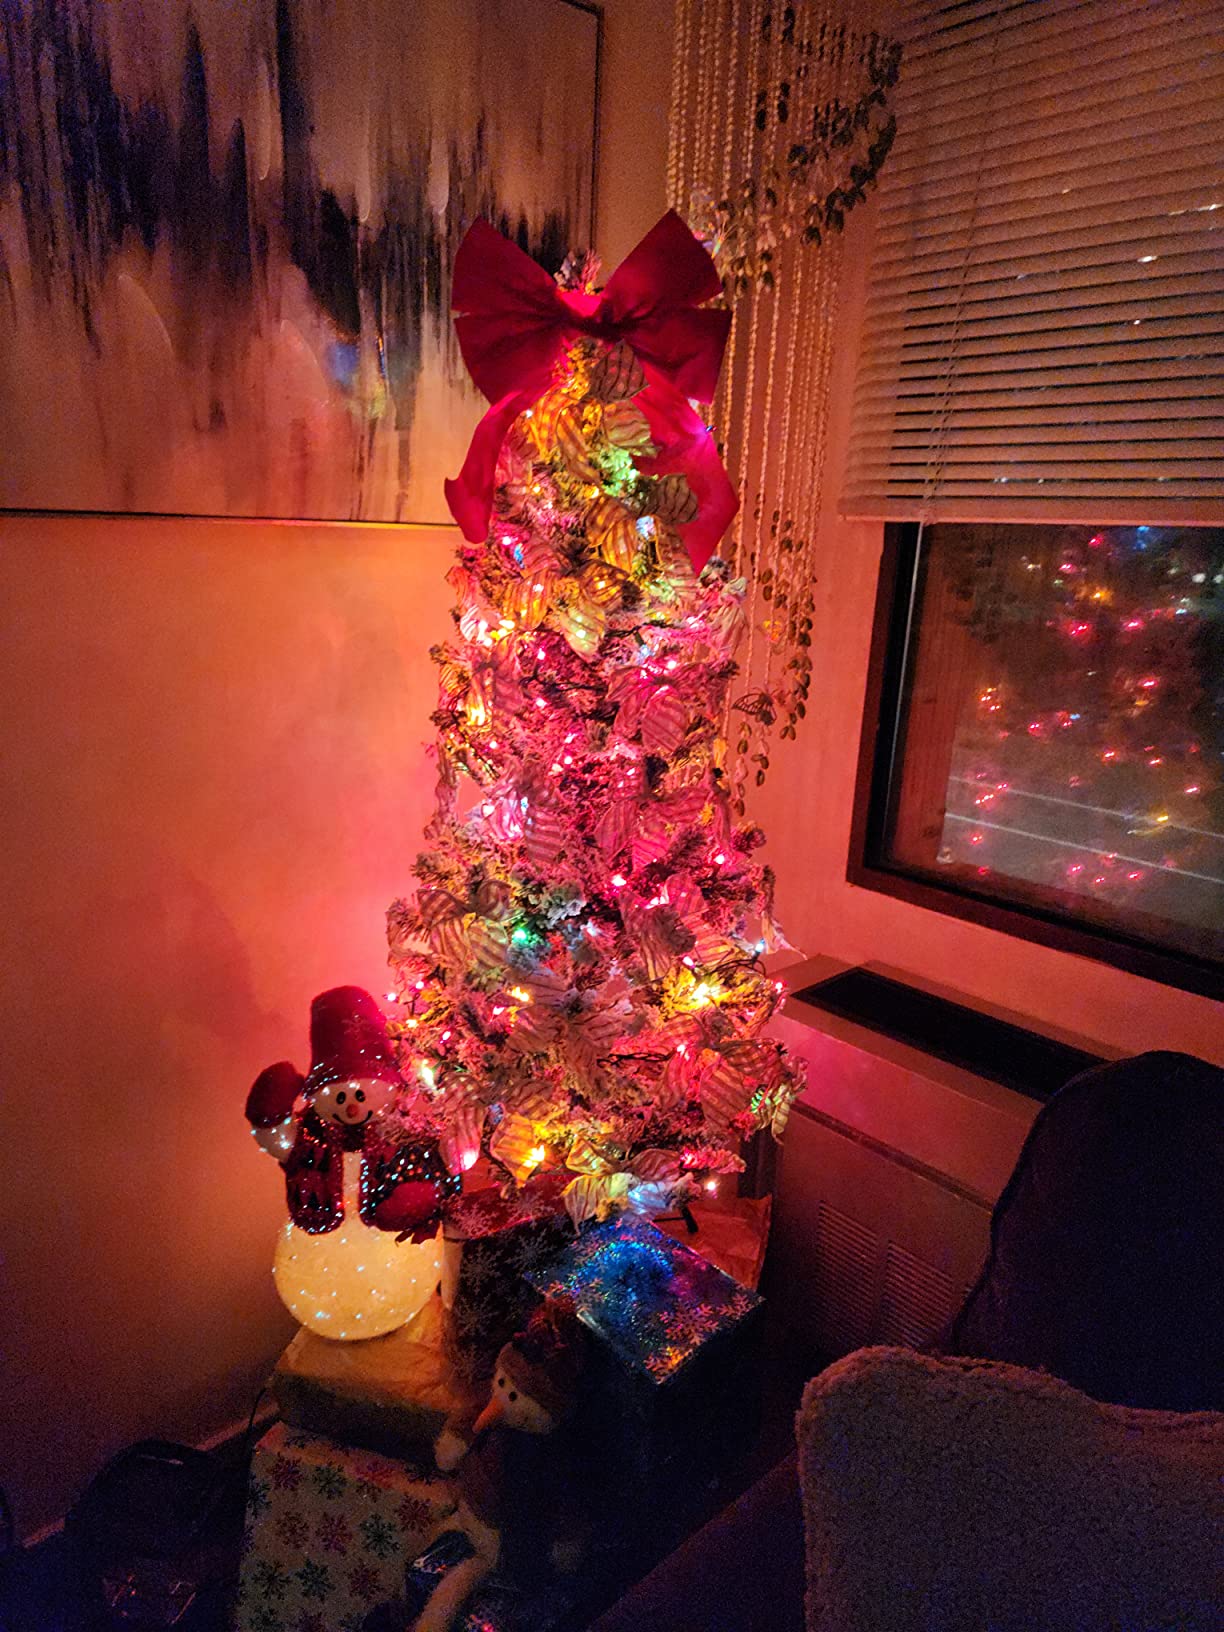 I get a more gorgeous glow with my flocked Christmas tree.